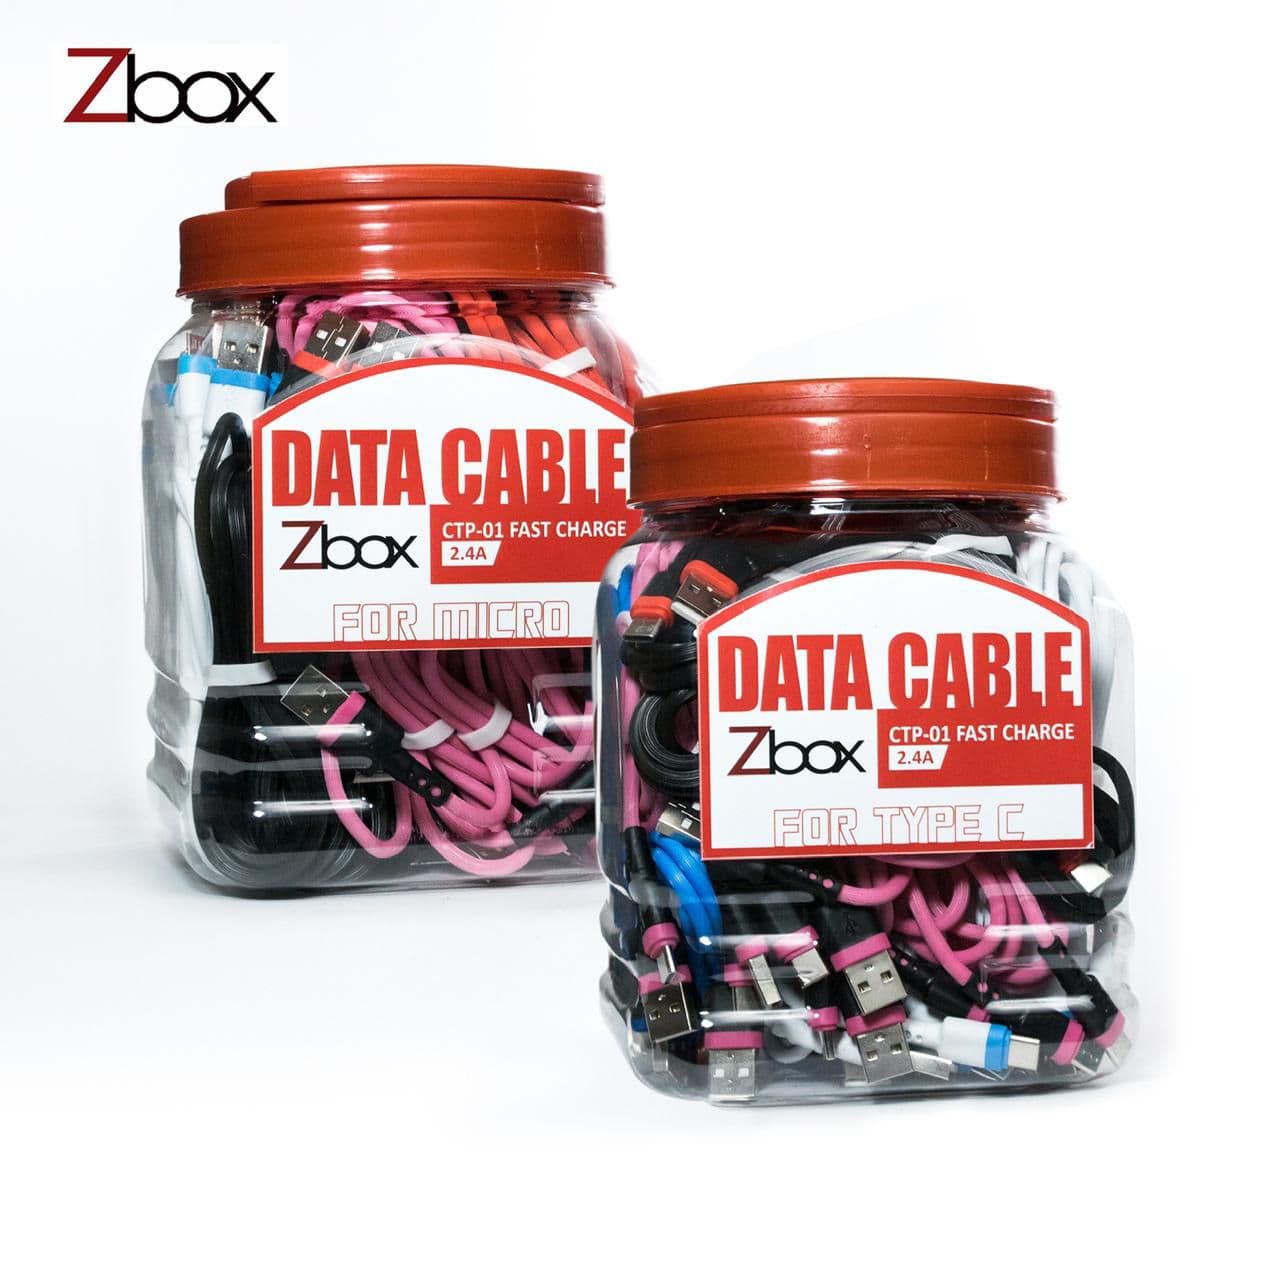 KABEL DATA ZBOX CTP-01 TYPE C  ( 1TOPLES ISI 40 )